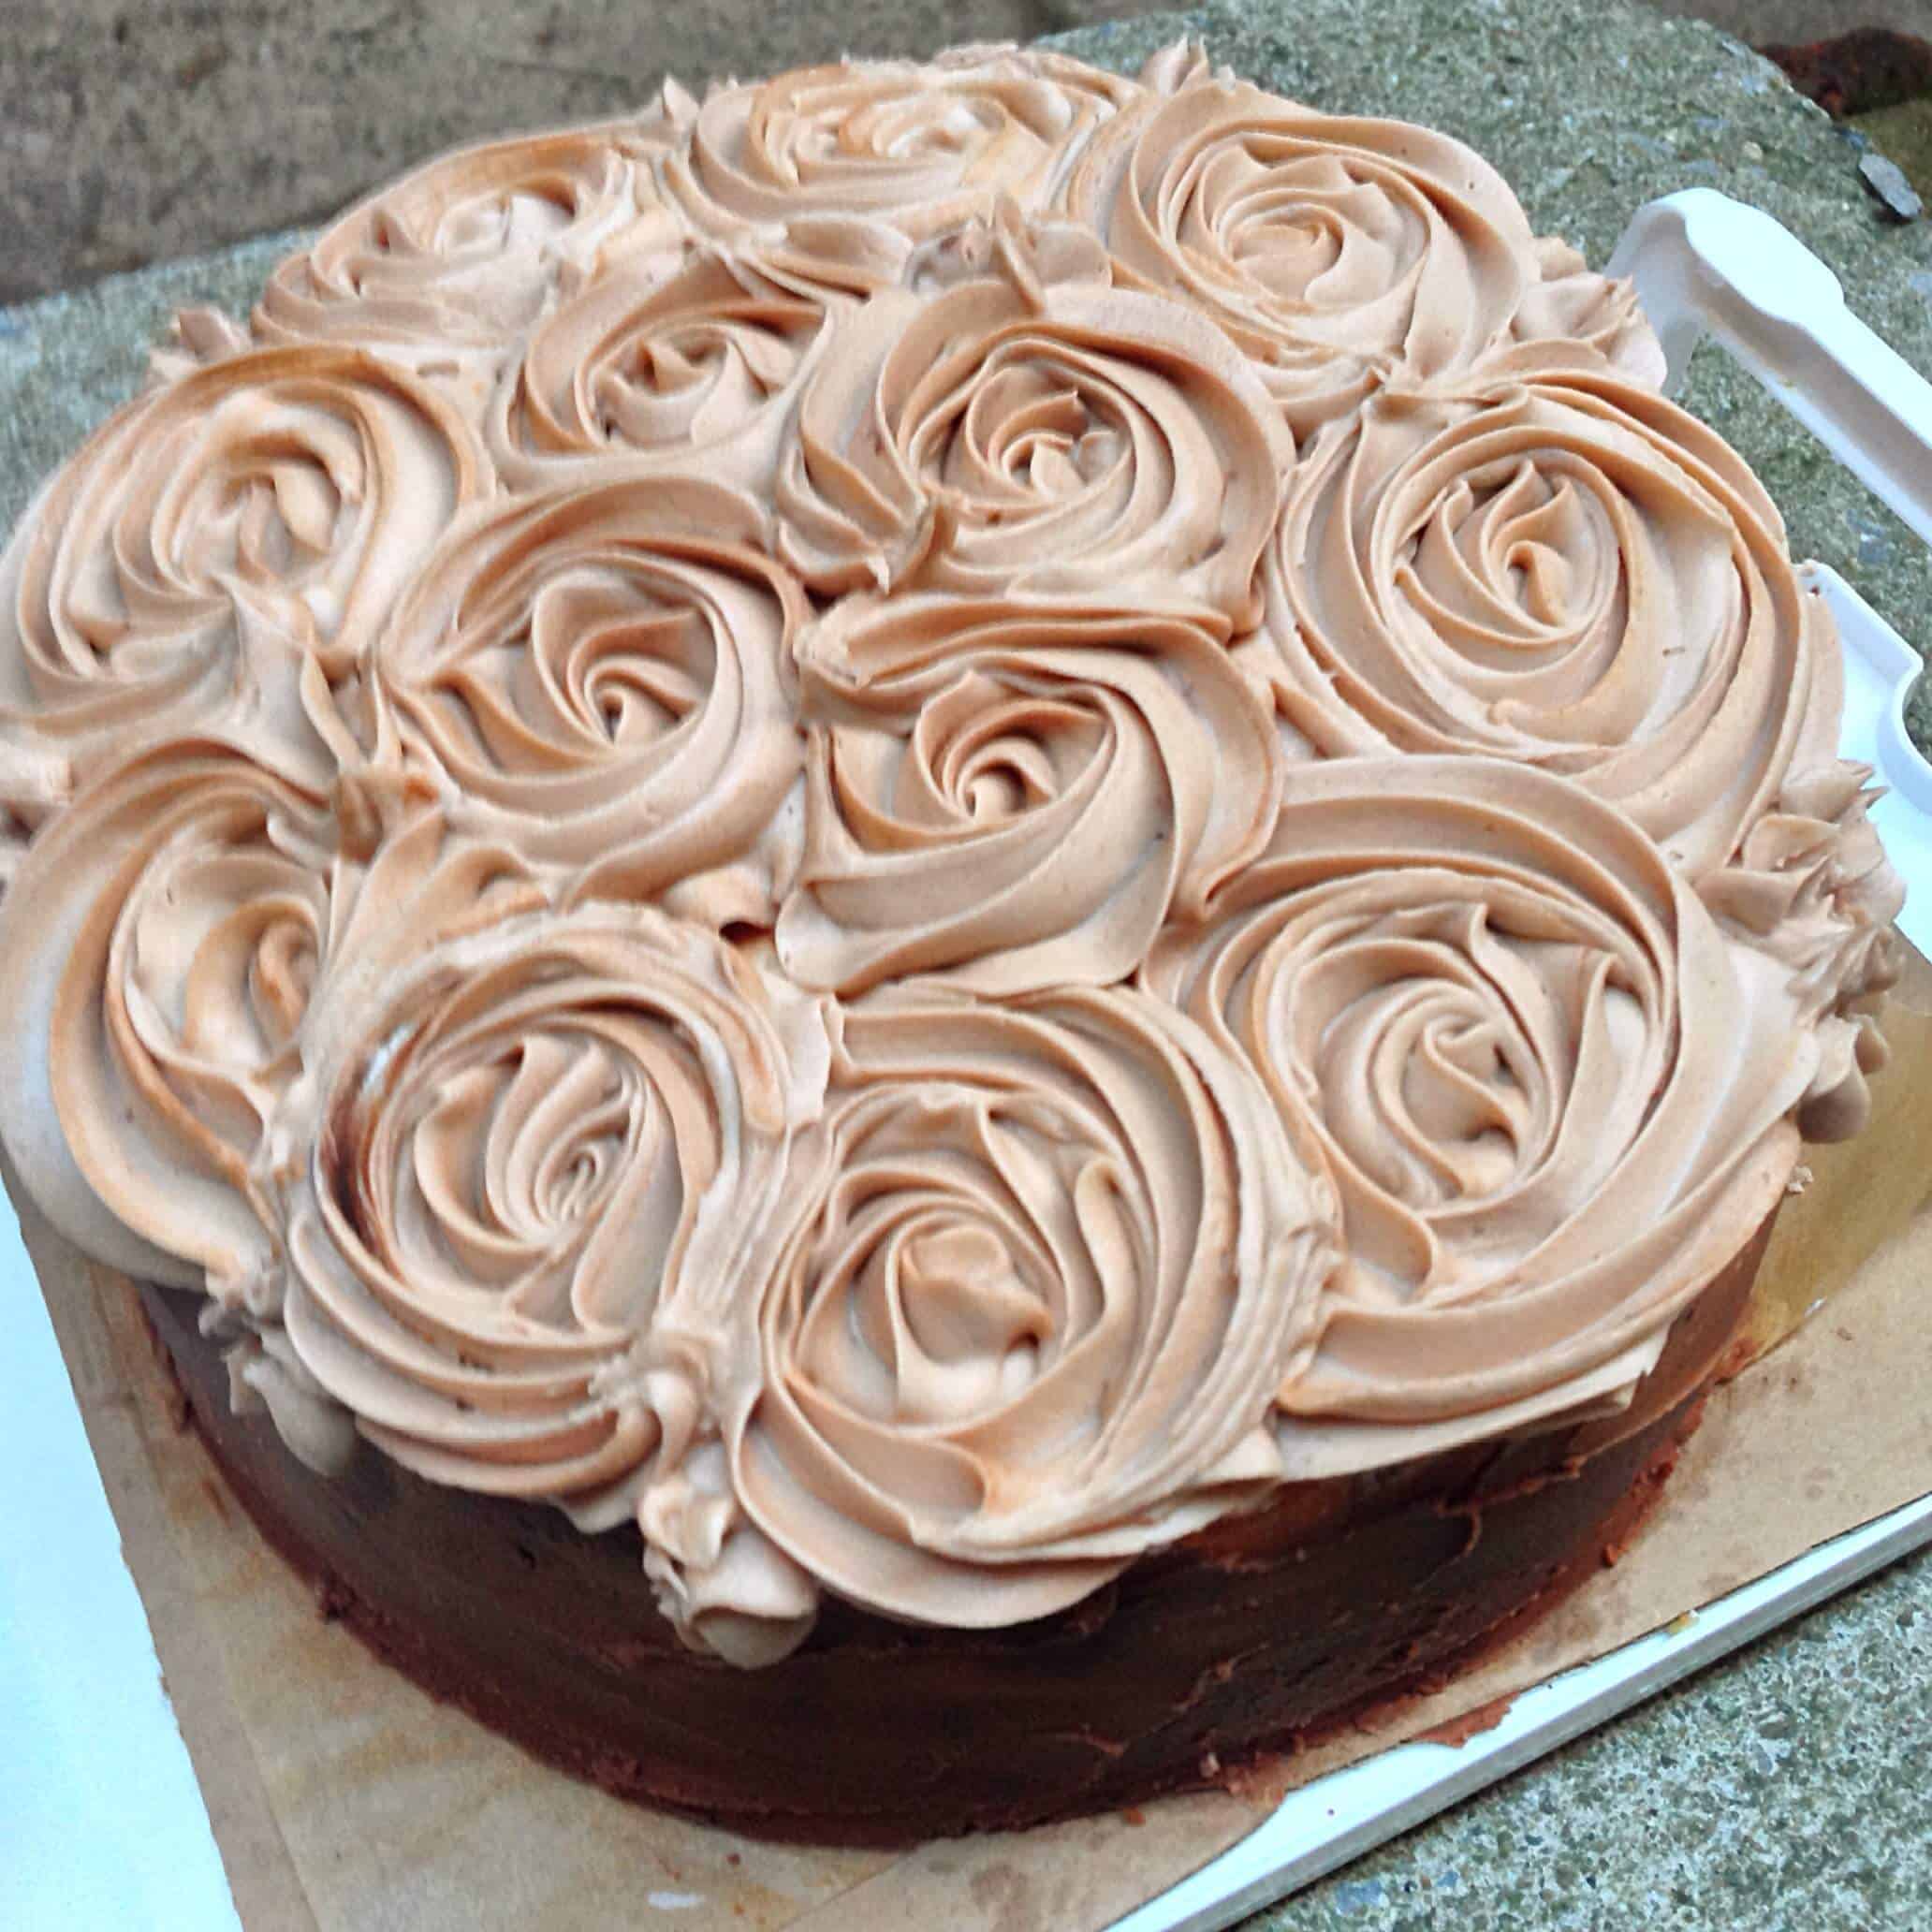 image of Nutella chocolate cake topped with buttercream roses